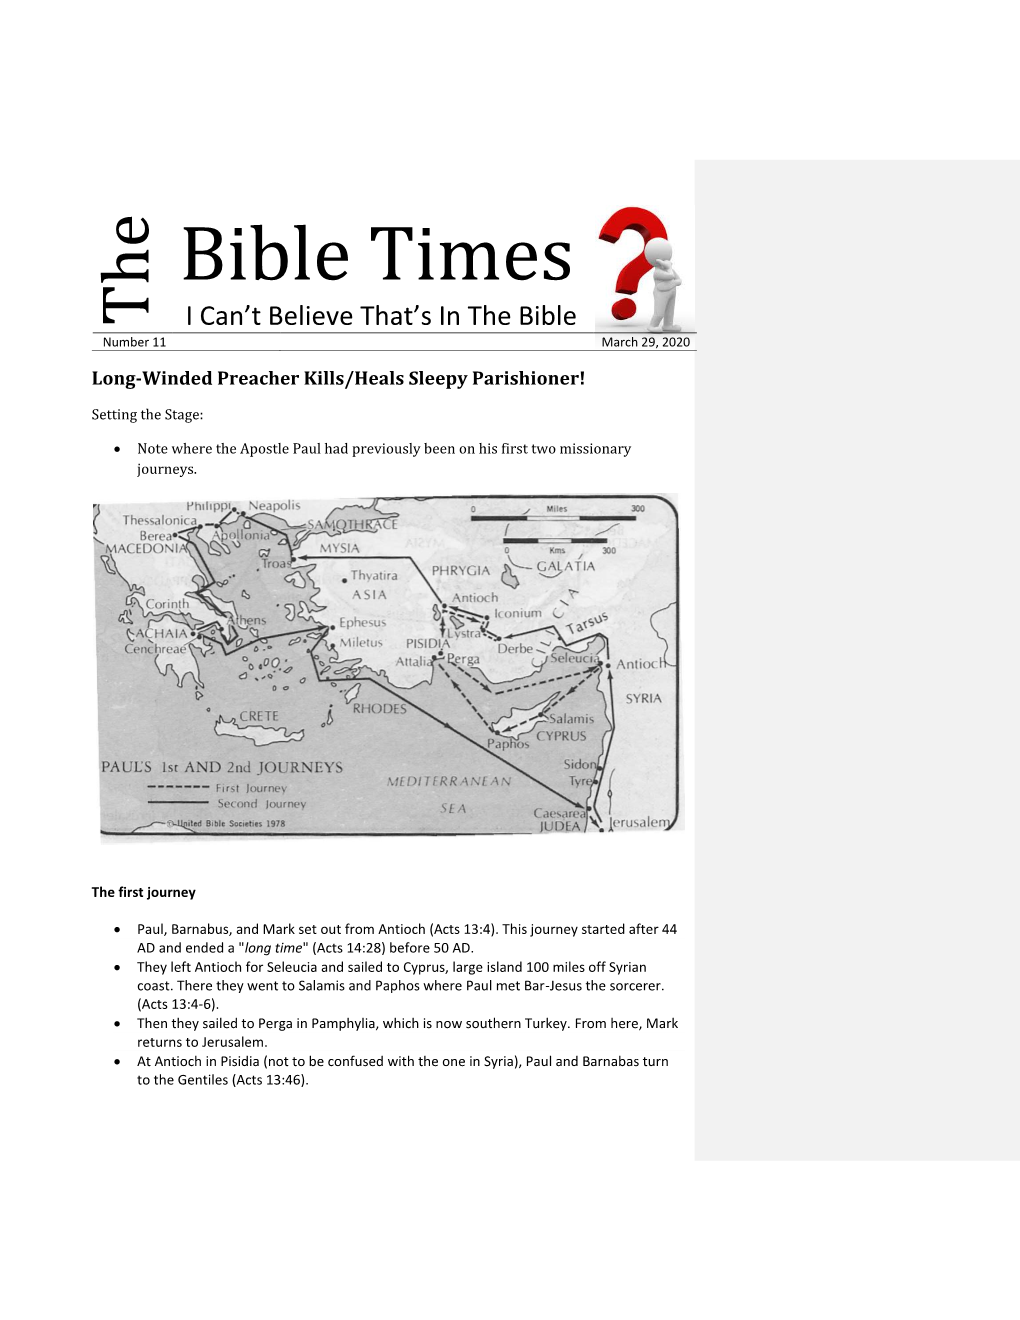 Bible Times I Can’T That’Sbelieve in Thebible